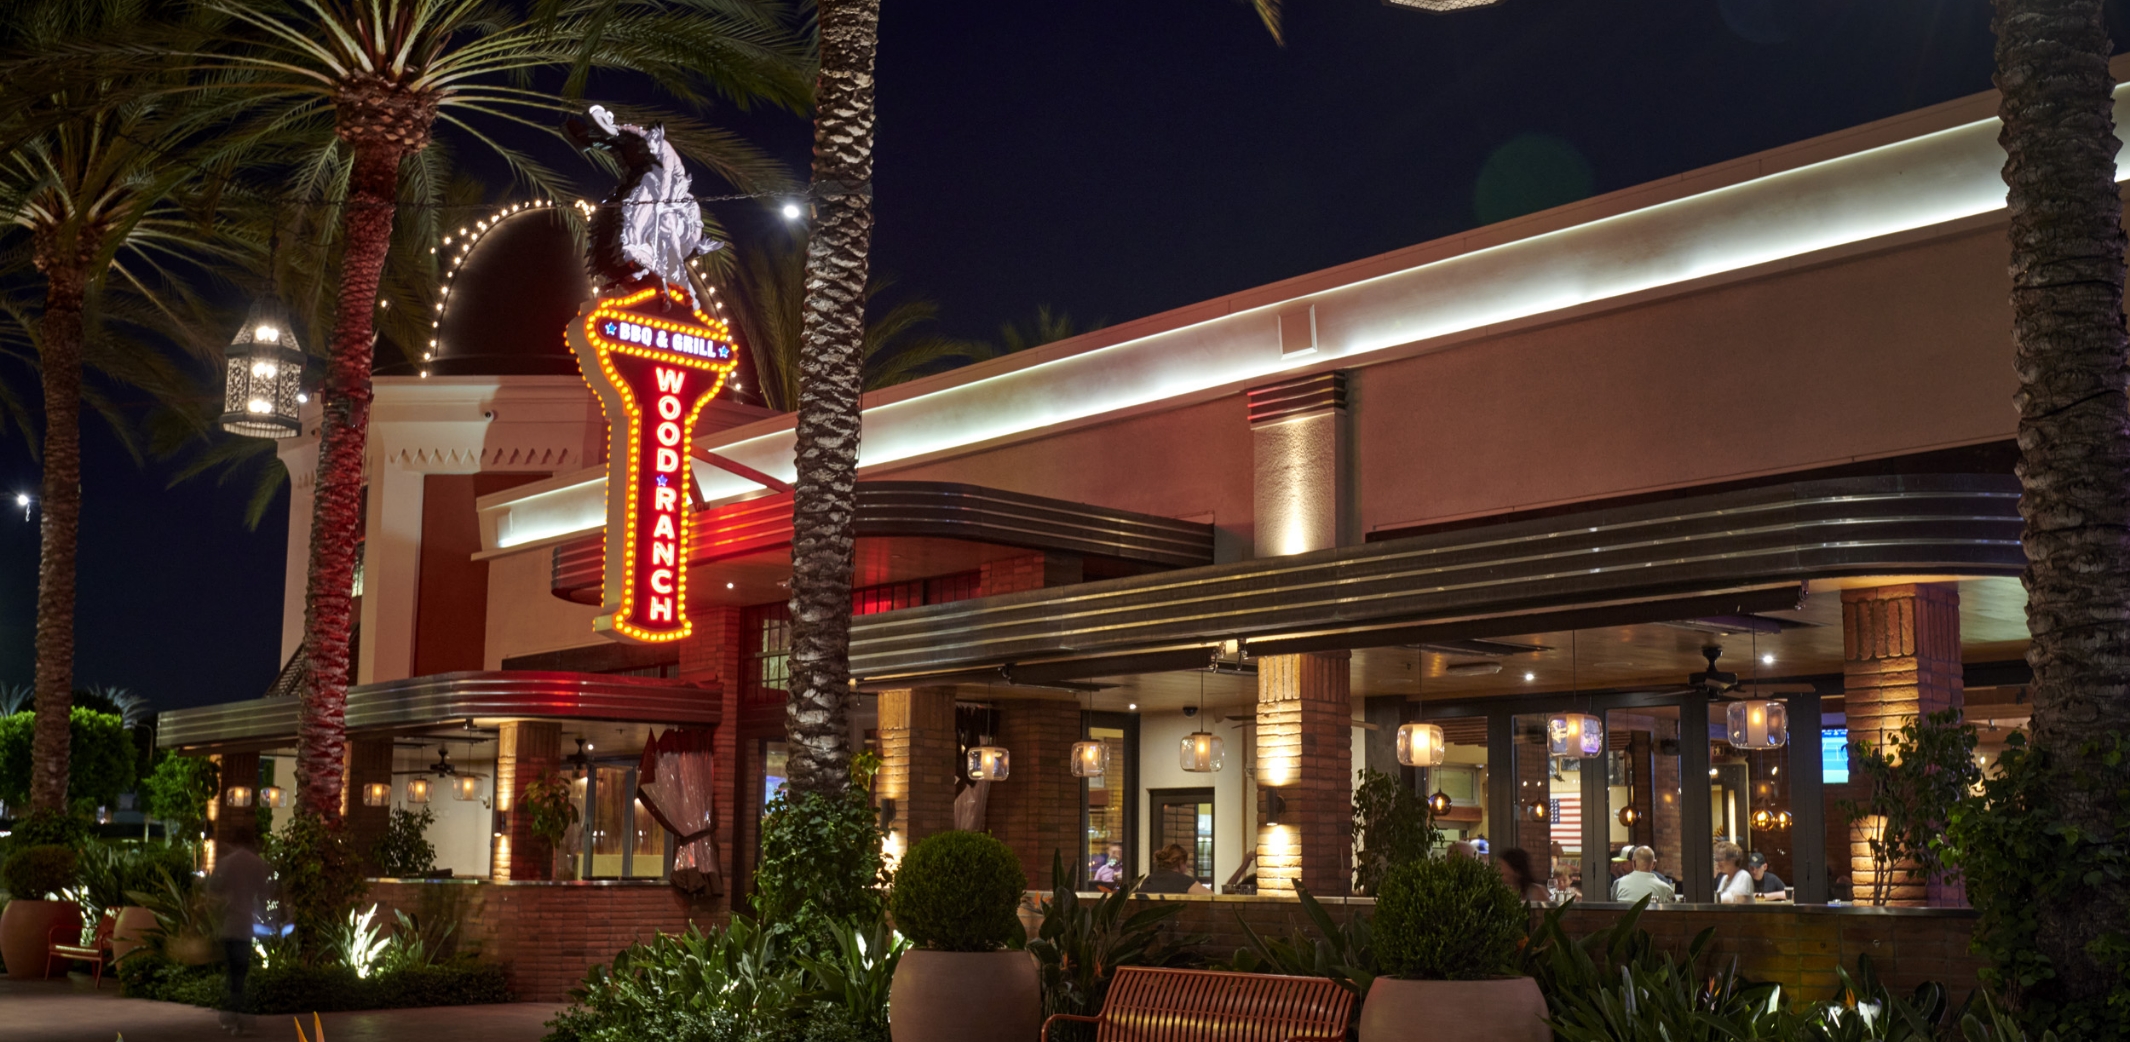 The iconic entrance of Wood Ranch BBQ & Grill Irvine at dusk, featuring neon signage and statuesque palm trees, inviting diners into the warmly lit, welcoming space.